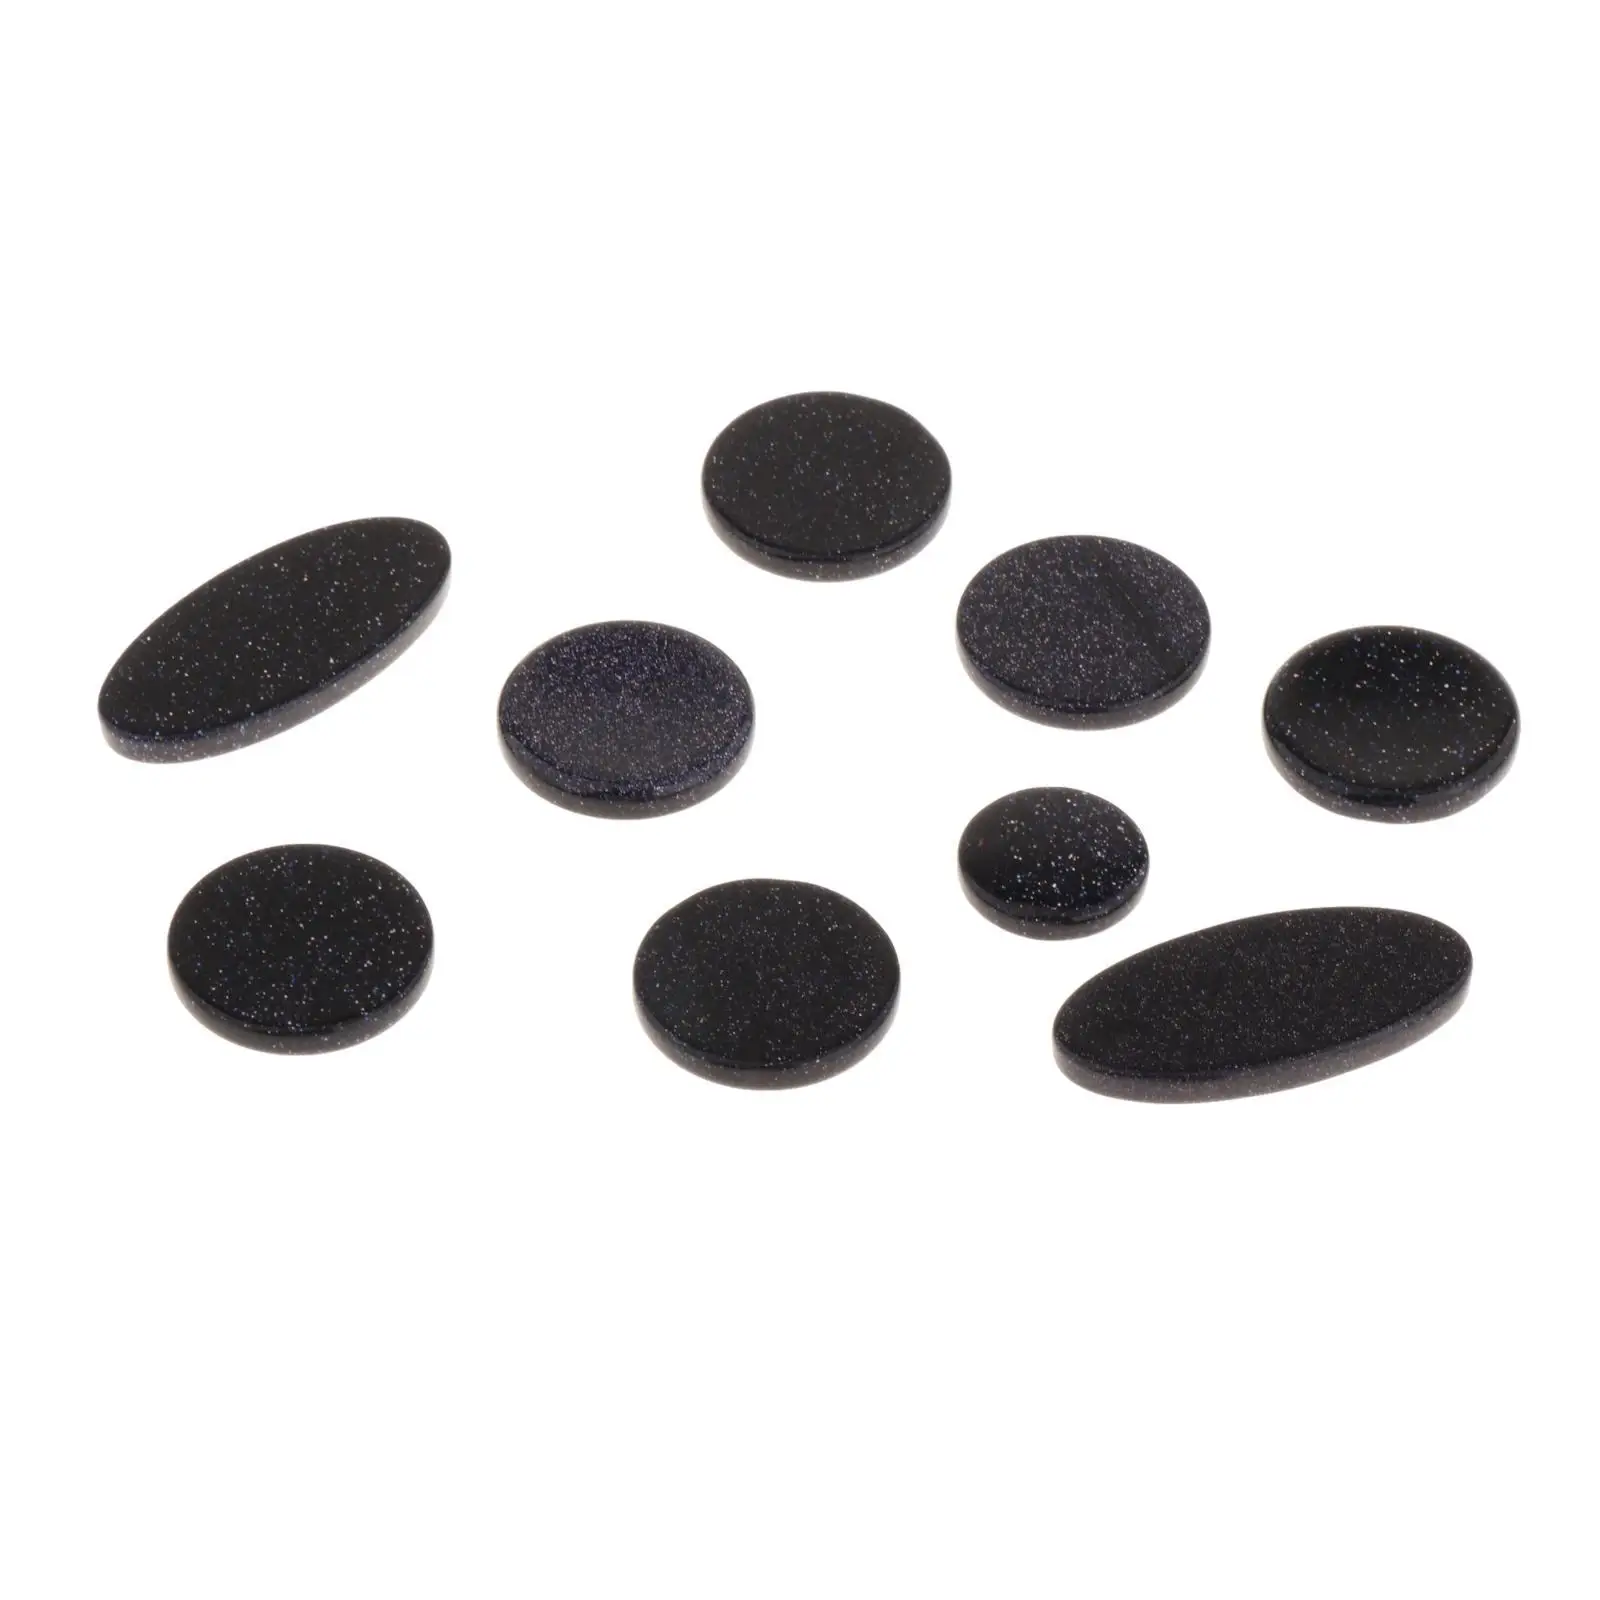 9Pcs Sax Finger Buttons Replacement Parts Musical Instruments Accessory for Alto/Tenor/Soprano